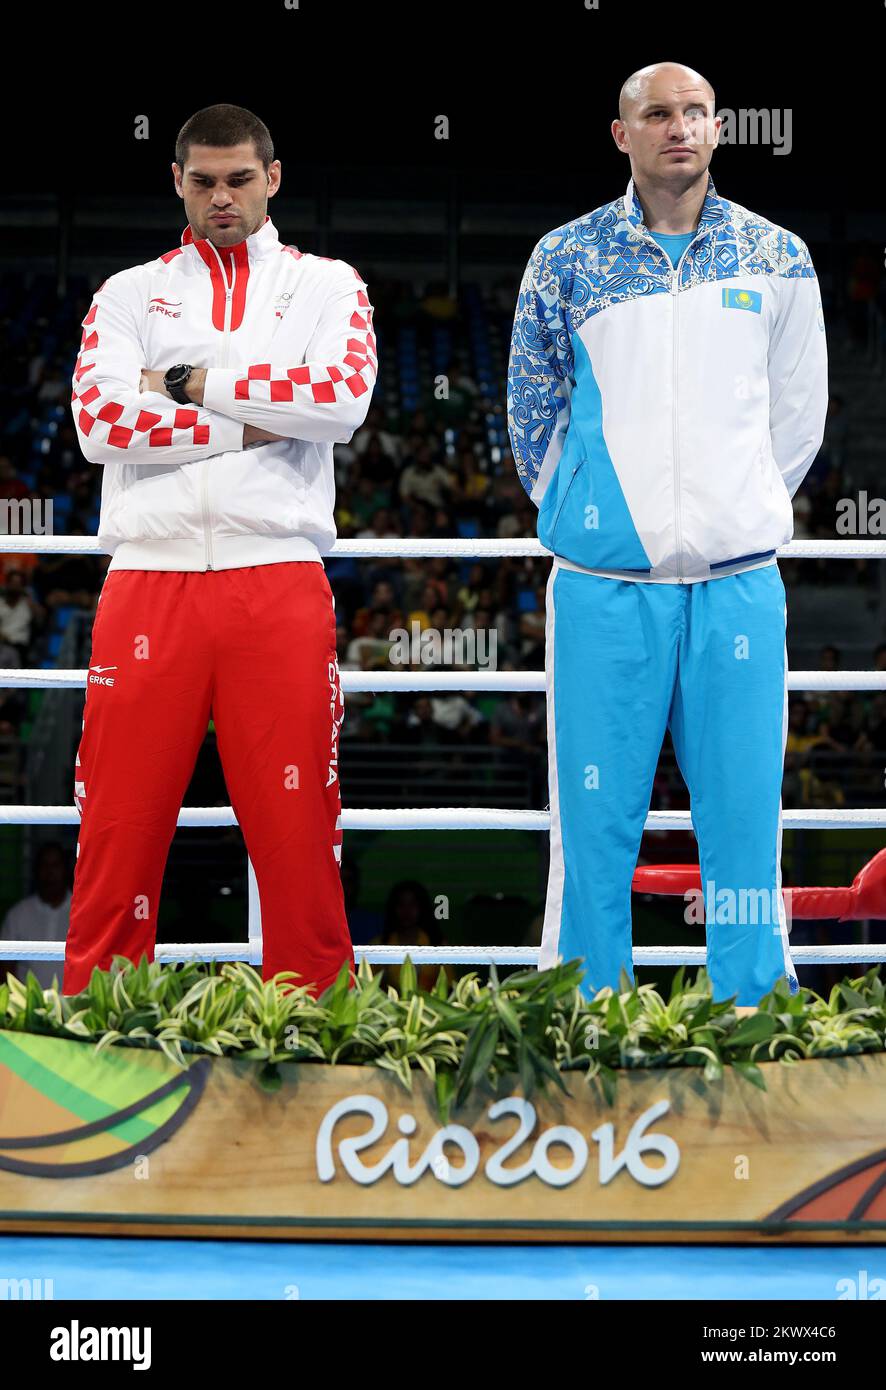 21.08.2016., Rio de Janeiro, Brazil - Bronze medalists Filip Hrgovic of Croatia and Ivan Dychko of Kazakhstan pose on the podium during the medal ceremony for the Men's Boxing Super Heavy +91kg.  Stock Photo